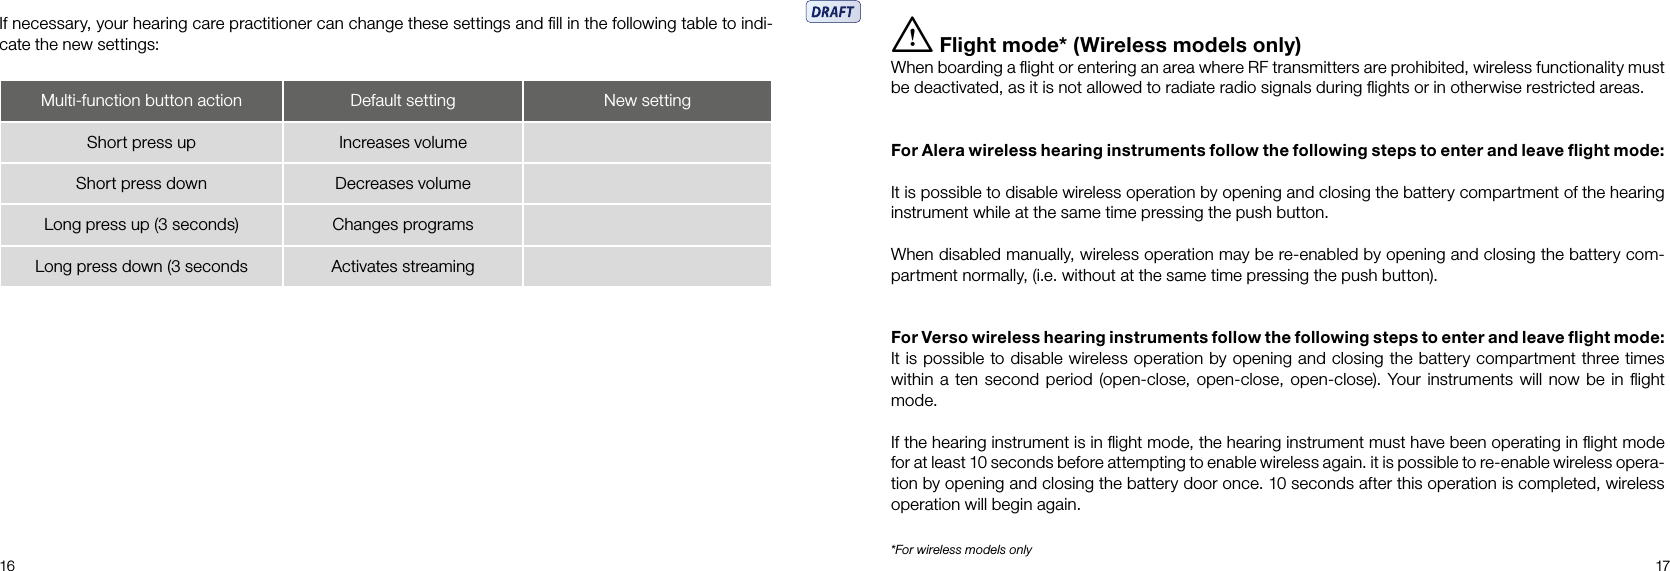 16 17*For wireless models onlyi Flight mode* (Wireless models only)When boarding a ﬂight or entering an area where RF transmitters are prohibited, wireless functionality must be deactivated, as it is not allowed to radiate radio signals during ﬂights or in otherwise restricted areas. For Alera wireless hearing instruments follow the following steps to enter and leave ﬂight mode:It is possible to disable wireless operation by opening and closing the battery compartment of the hearing instrument while at the same time pressing the push button.When disabled manually, wireless operation may be re-enabled by opening and closing the battery com-partment normally, (i.e. without at the same time pressing the push button).For Verso wireless hearing instruments follow the following steps to enter and leave ﬂight mode:It is possible to disable wireless operation by opening and closing the battery compartment three times within a ten second period (open-close, open-close, open-close). Your instruments will now be in ﬂight mode. If the hearing instrument is in ﬂight mode, the hearing instrument must have been operating in ﬂight mode for at least 10 seconds before attempting to enable wireless again. it is possible to re-enable wireless opera-tion by opening and closing the battery door once. 10 seconds after this operation is completed, wireless operation will begin again.If necessary, your hearing care practitioner can change these settings and ﬁll in the following table to indi-cate the new settings:Multi-function button action Default setting New settingShort press up Increases volumeShort press down Decreases volumeLong press up (3 seconds) Changes programsLong press down (3 seconds Activates streaming